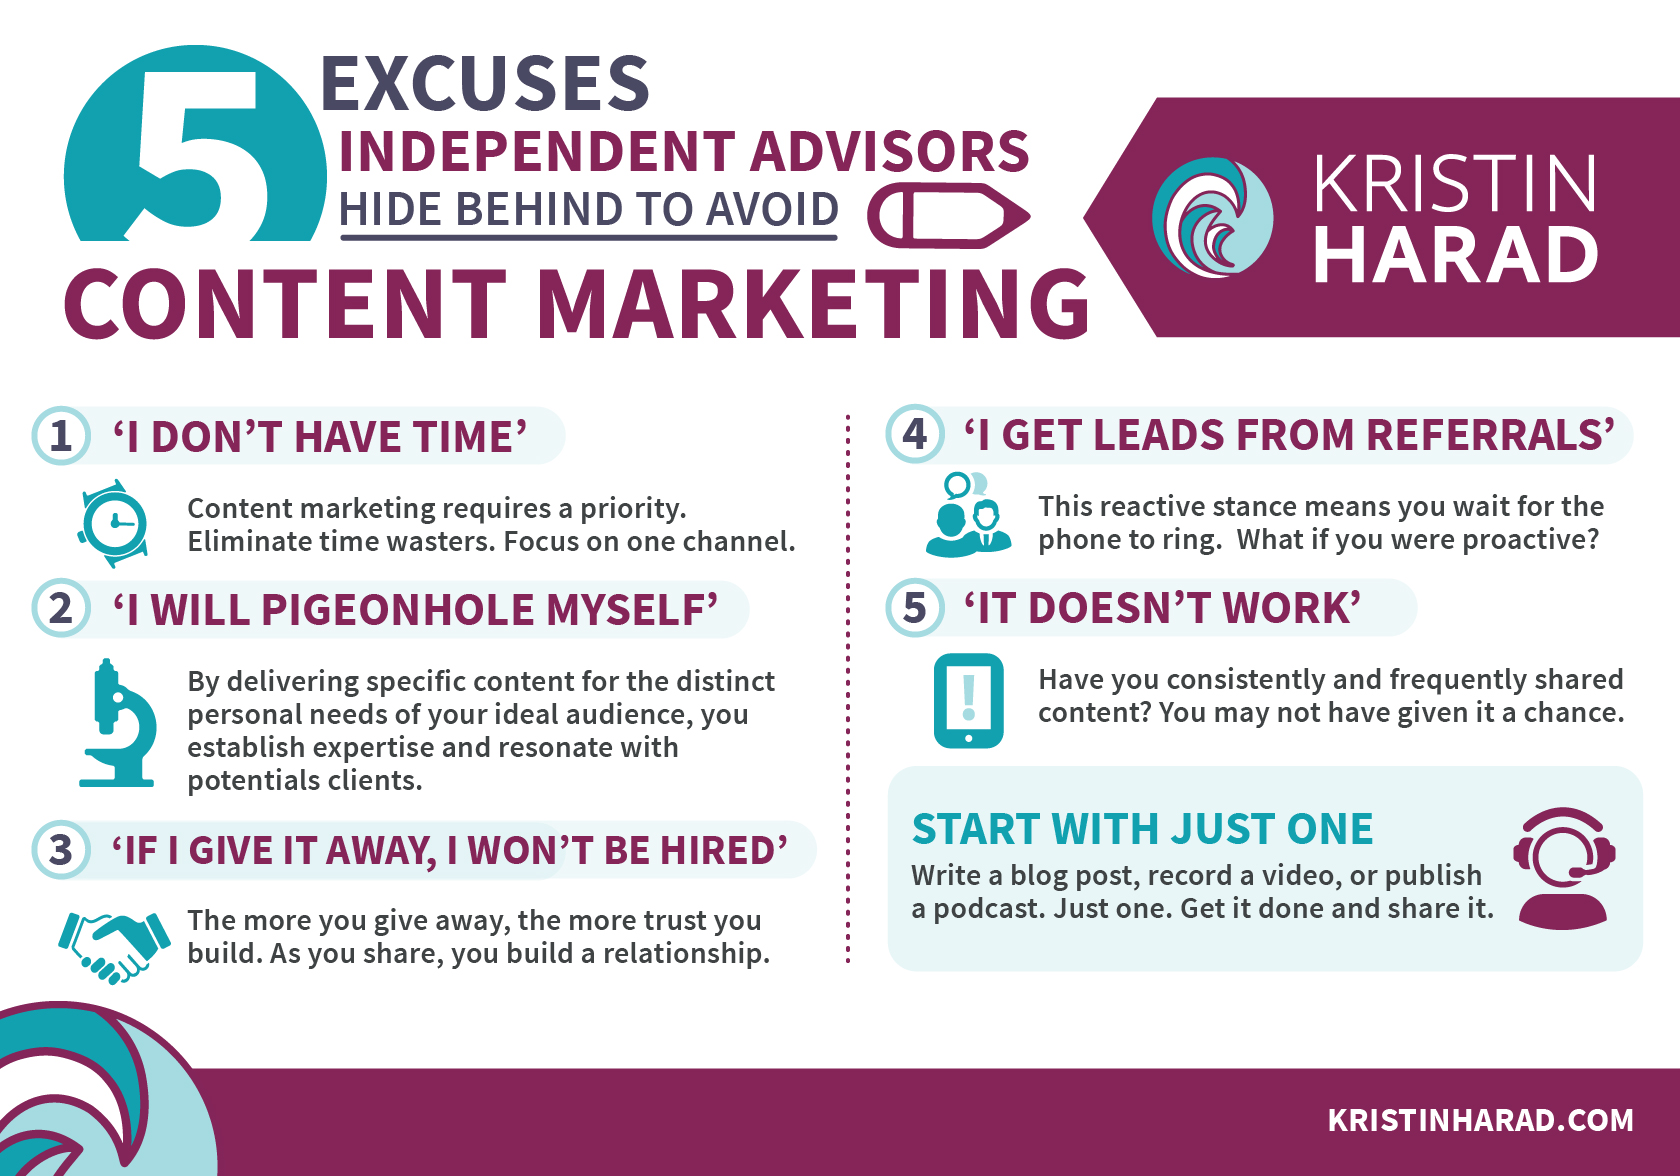 5 excuses advisors use to avoid content marketing